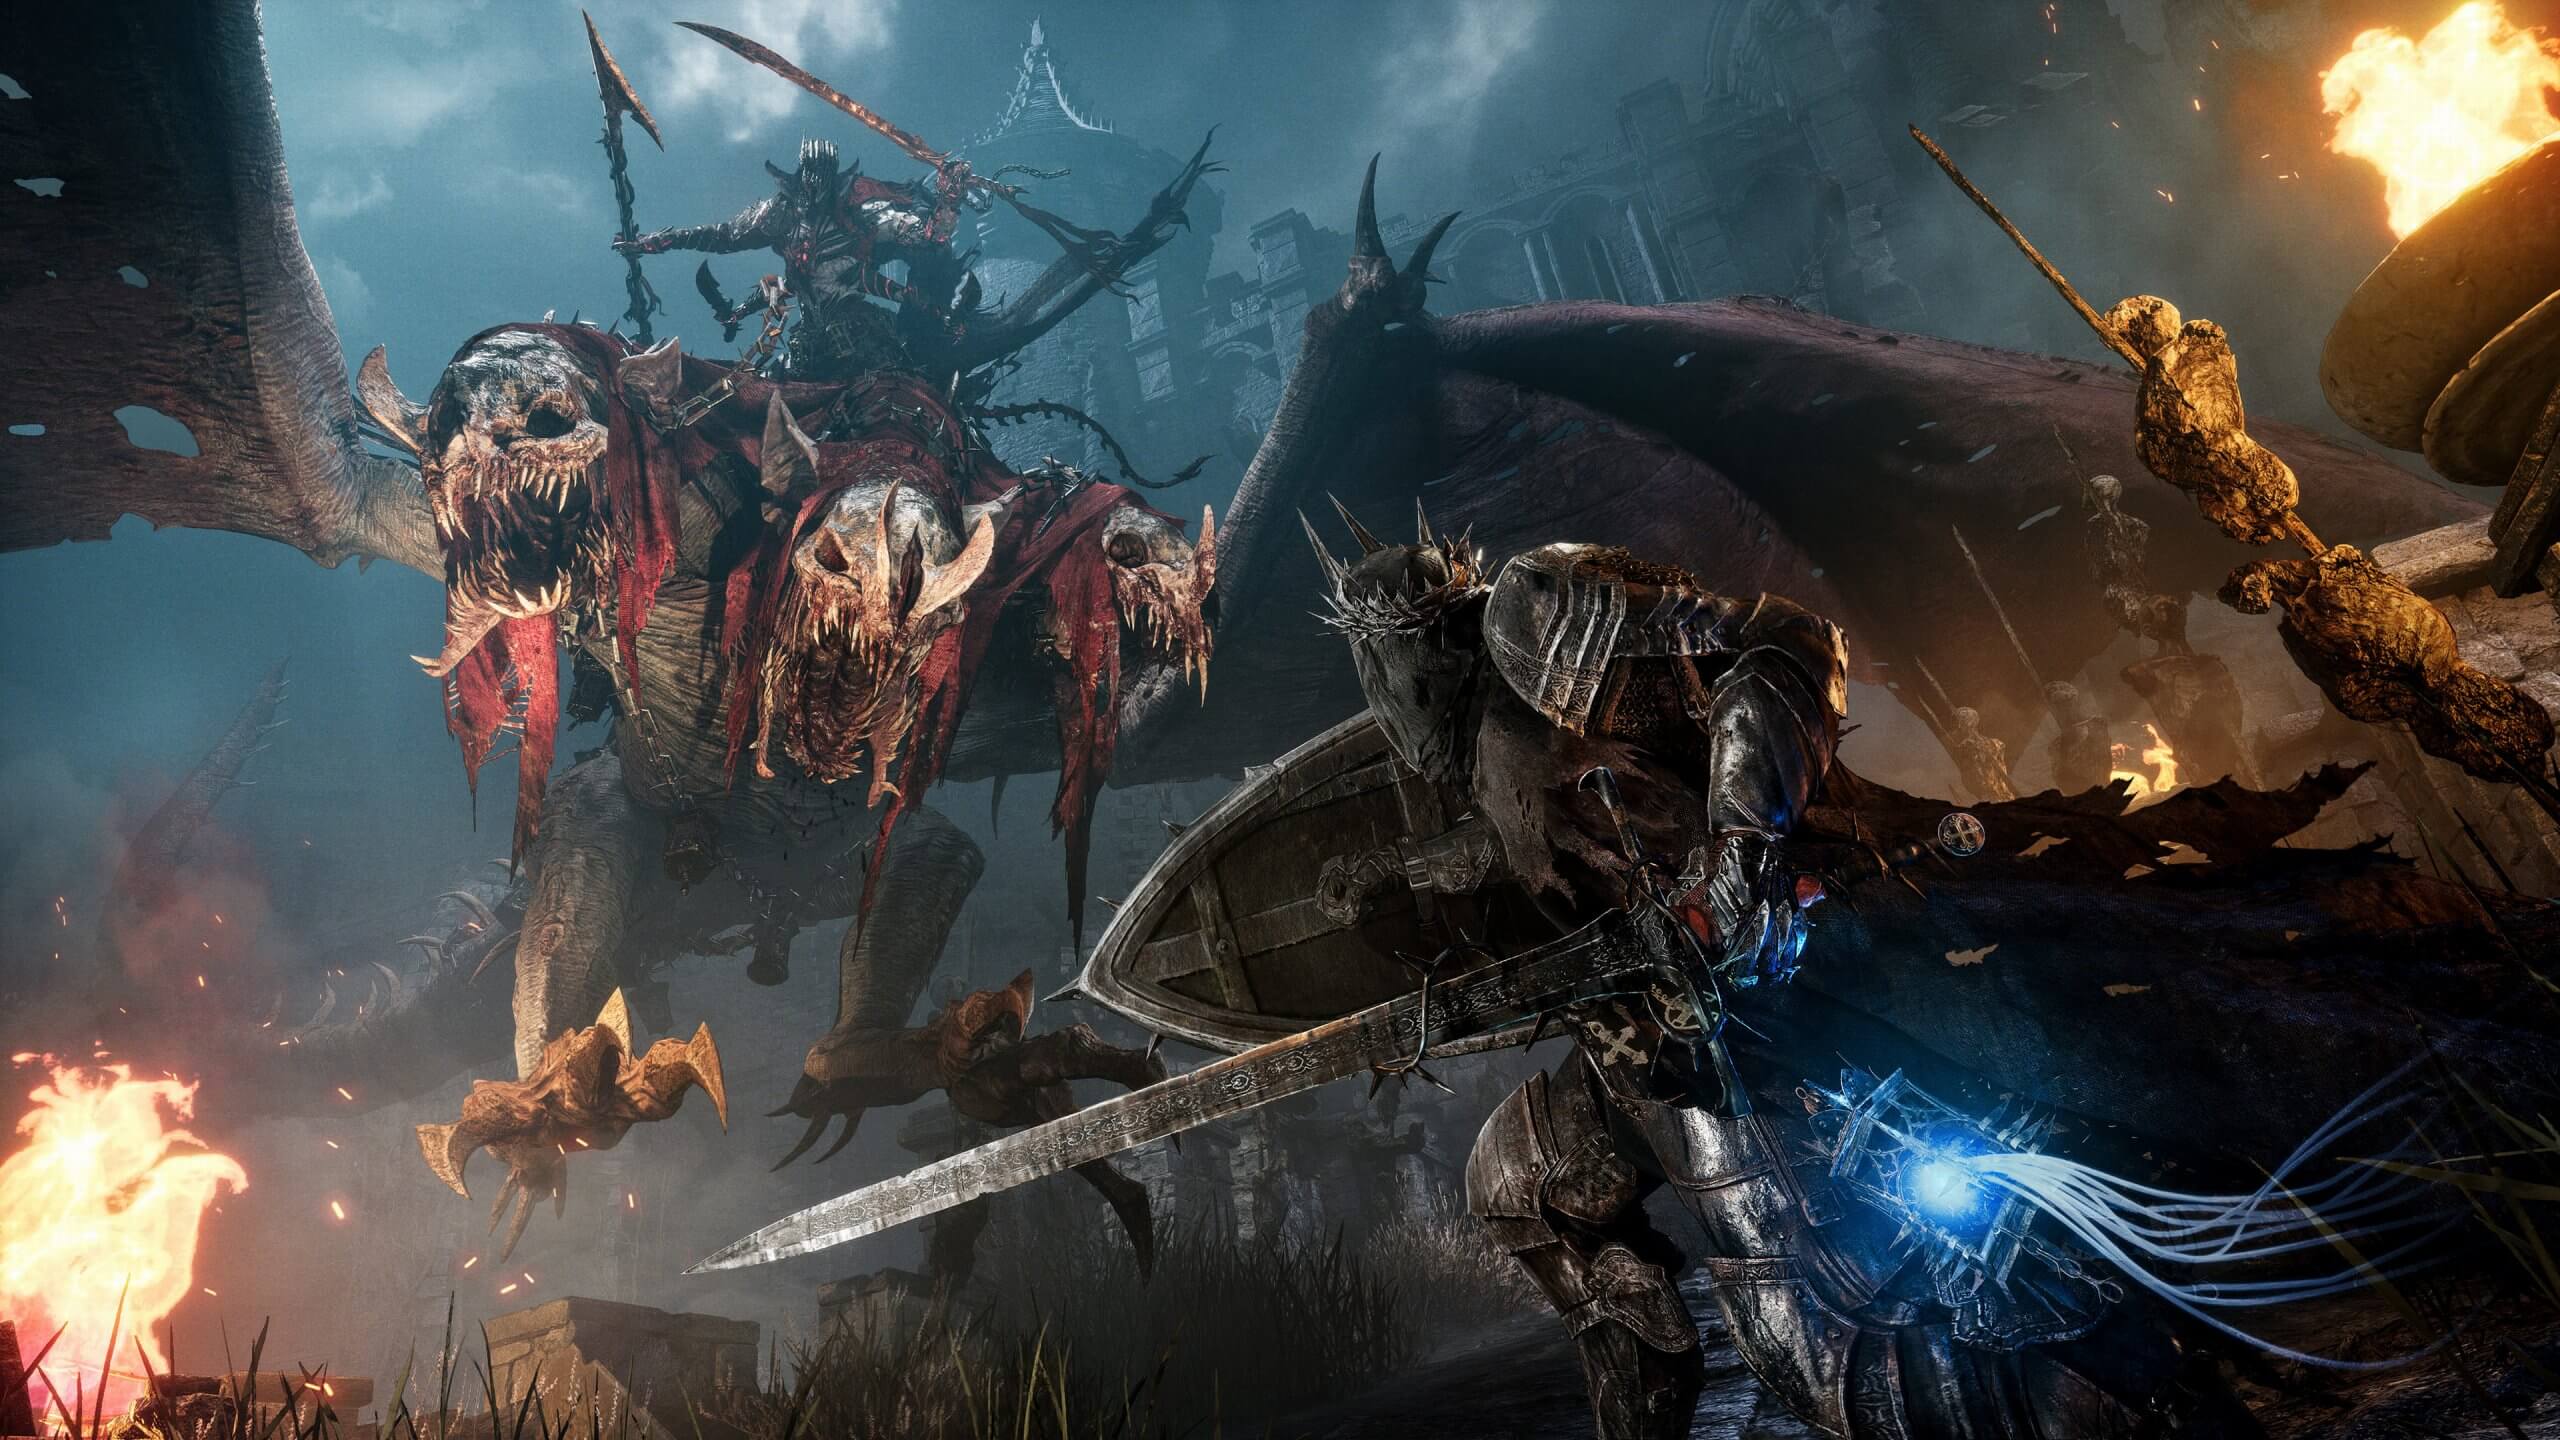 Lords of the Fallen Update 1.021 for Patch Version 1.1.379 Smashed